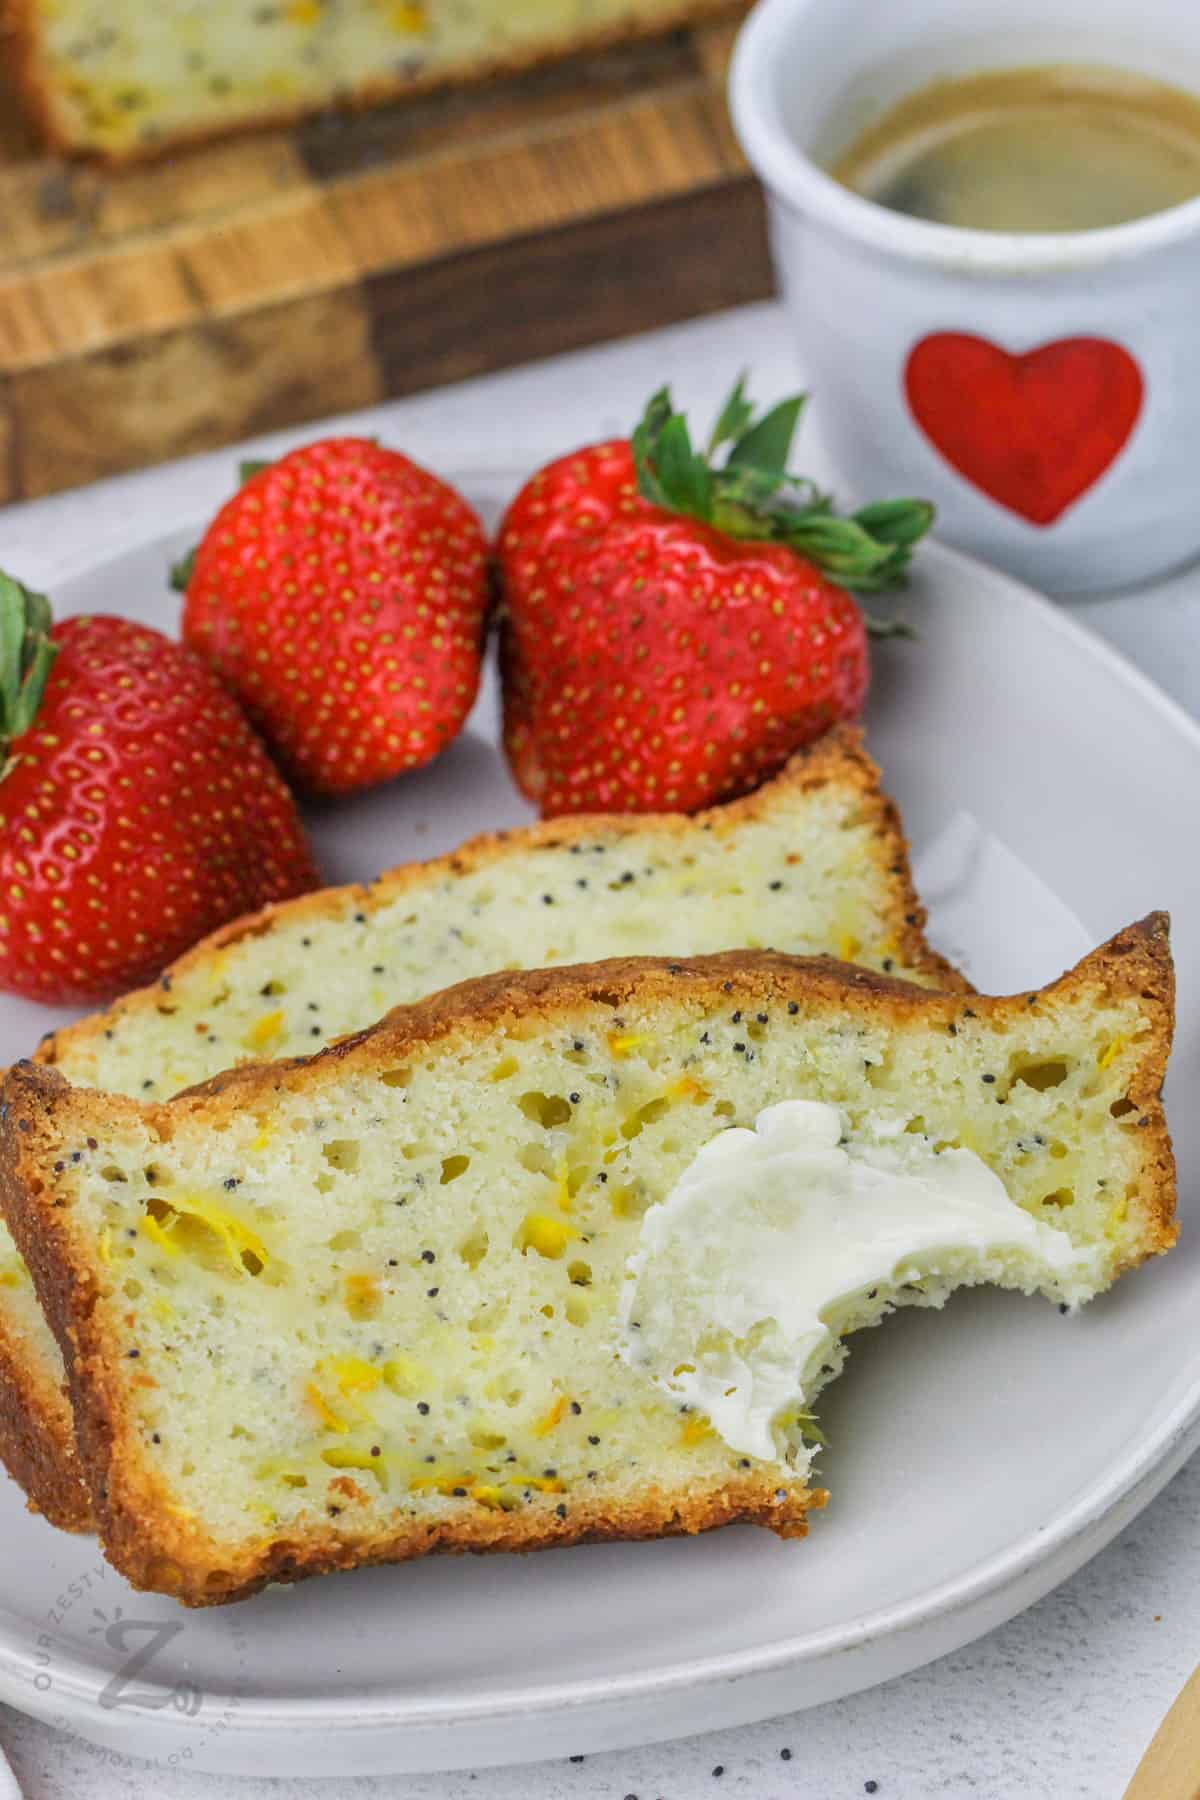 slices of Lemon Zucchini Bread with strawberries